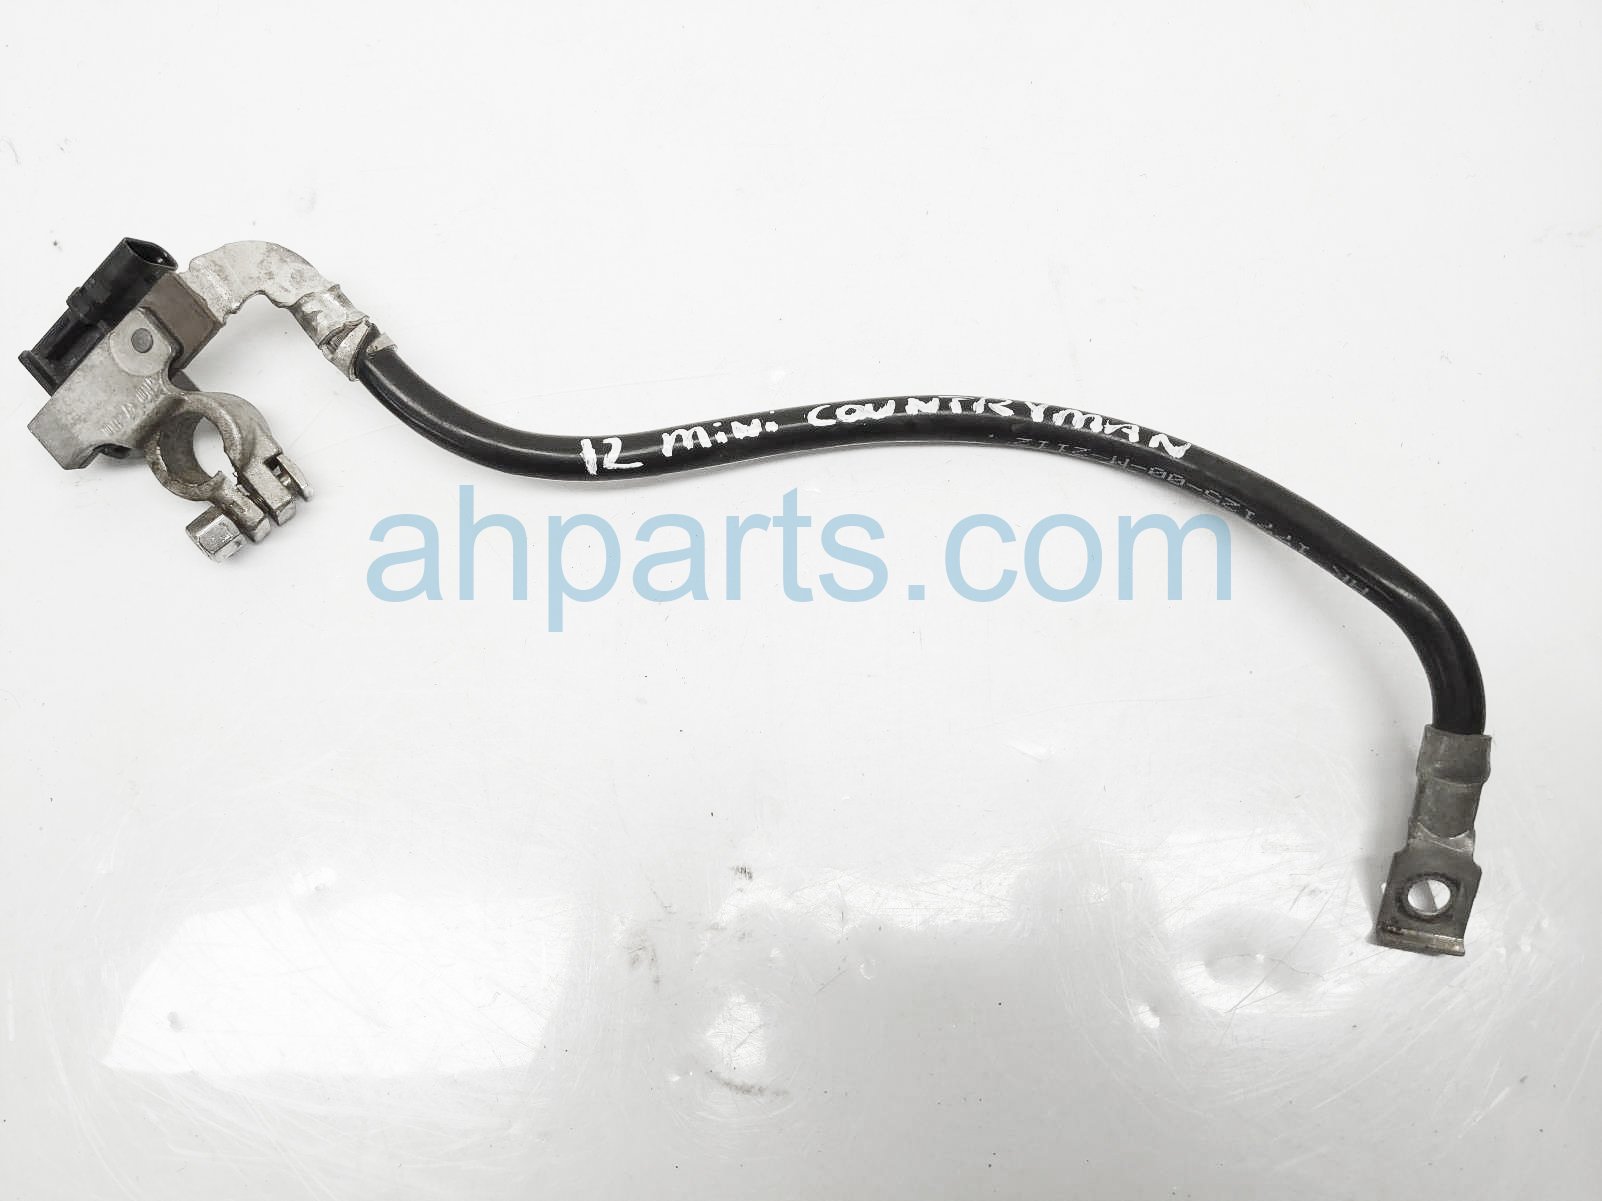 $65 BMW NEGATIVE BATTERY CABLE HARNESS